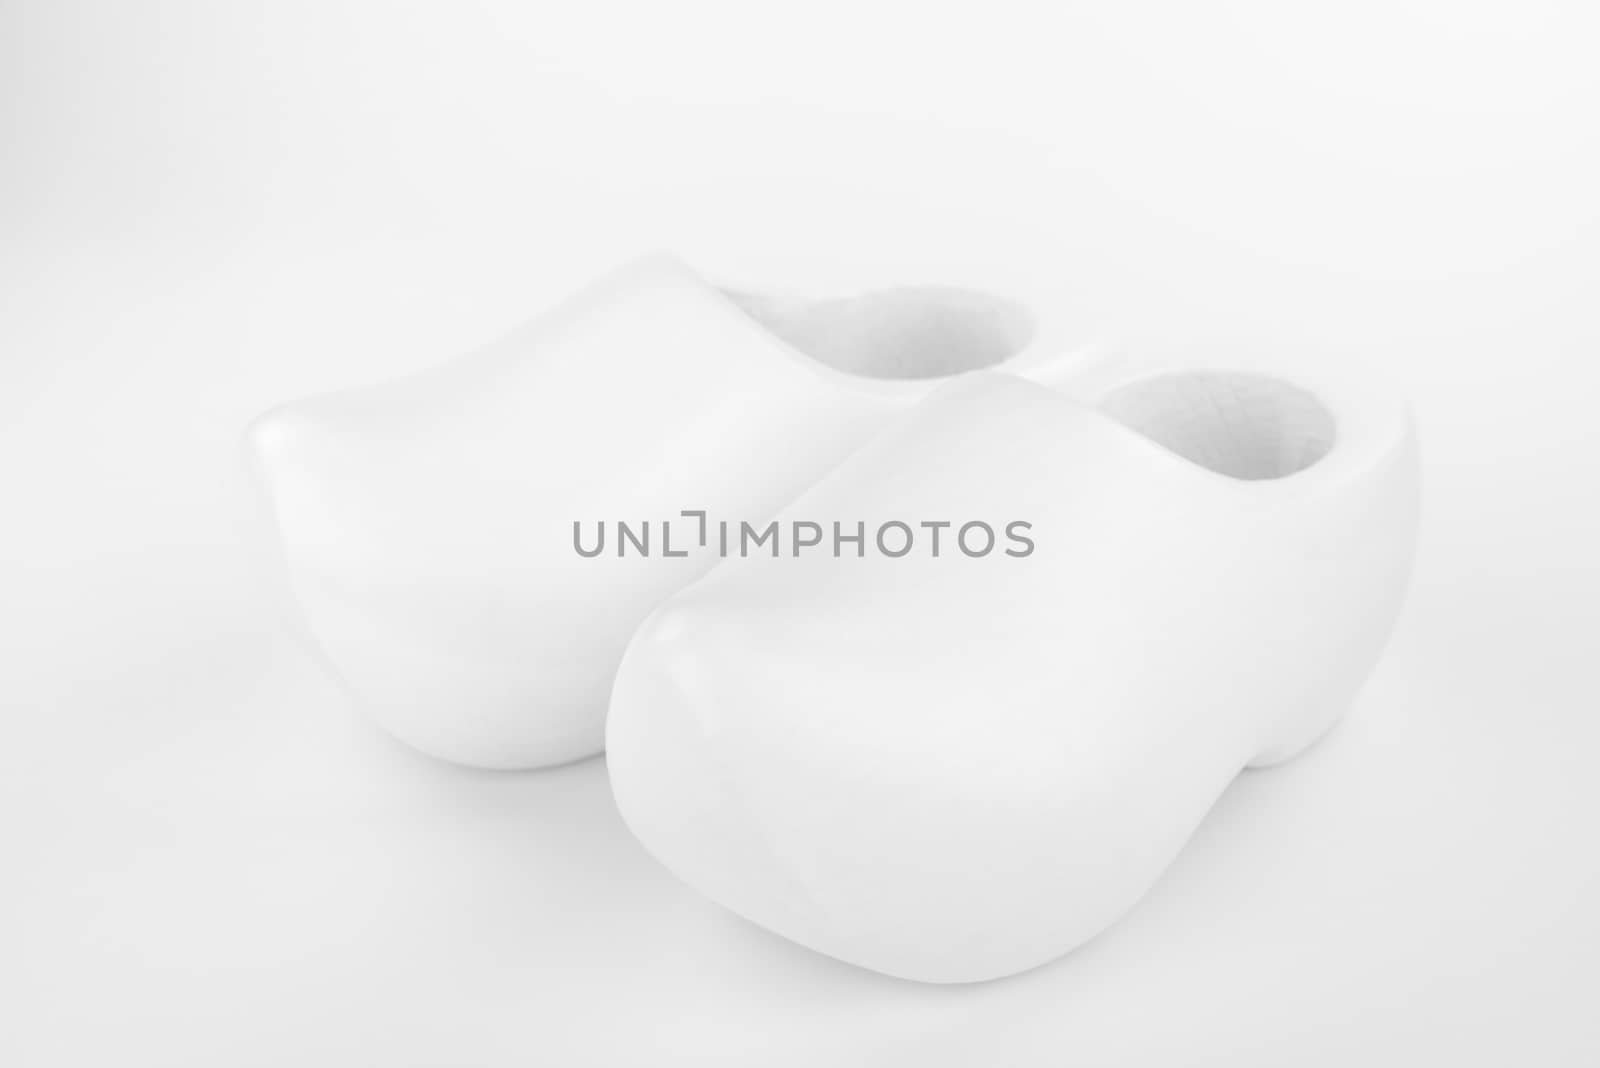 Wooden shoes in a high key recording
 by Tofotografie